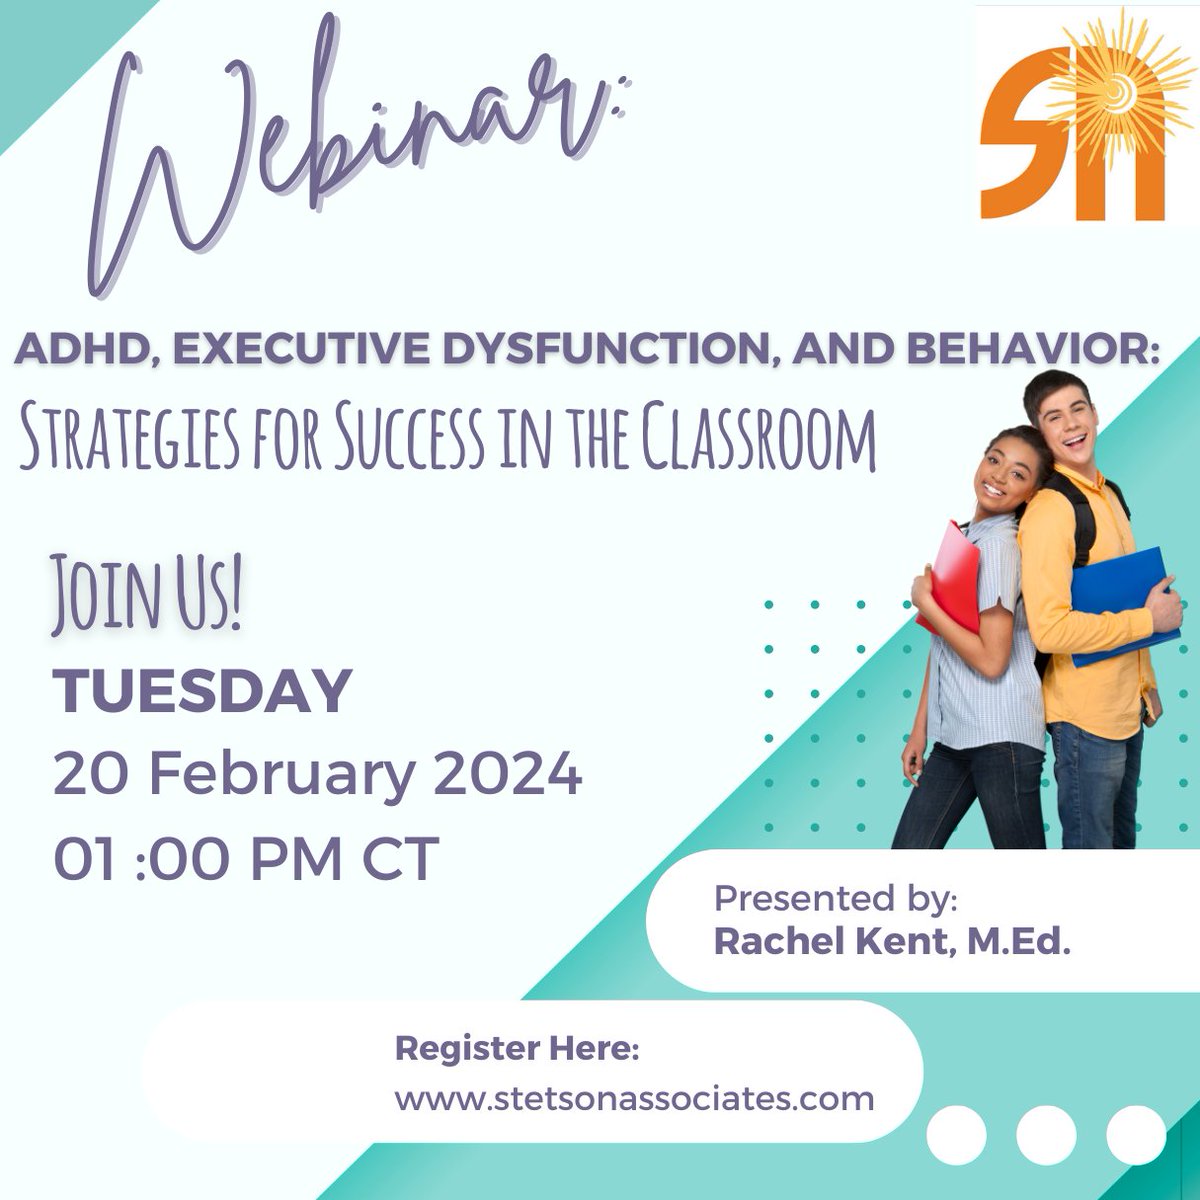 🎒Only ONE WEEK until our Free Webinar!🎒 Discover techniques and tools to support and elevate the learning experience of students with ADHD. Register today to save your spot! ow.ly/w6j650QAoGa #ADHD #ClassroomBehavior #InclusiveSchools